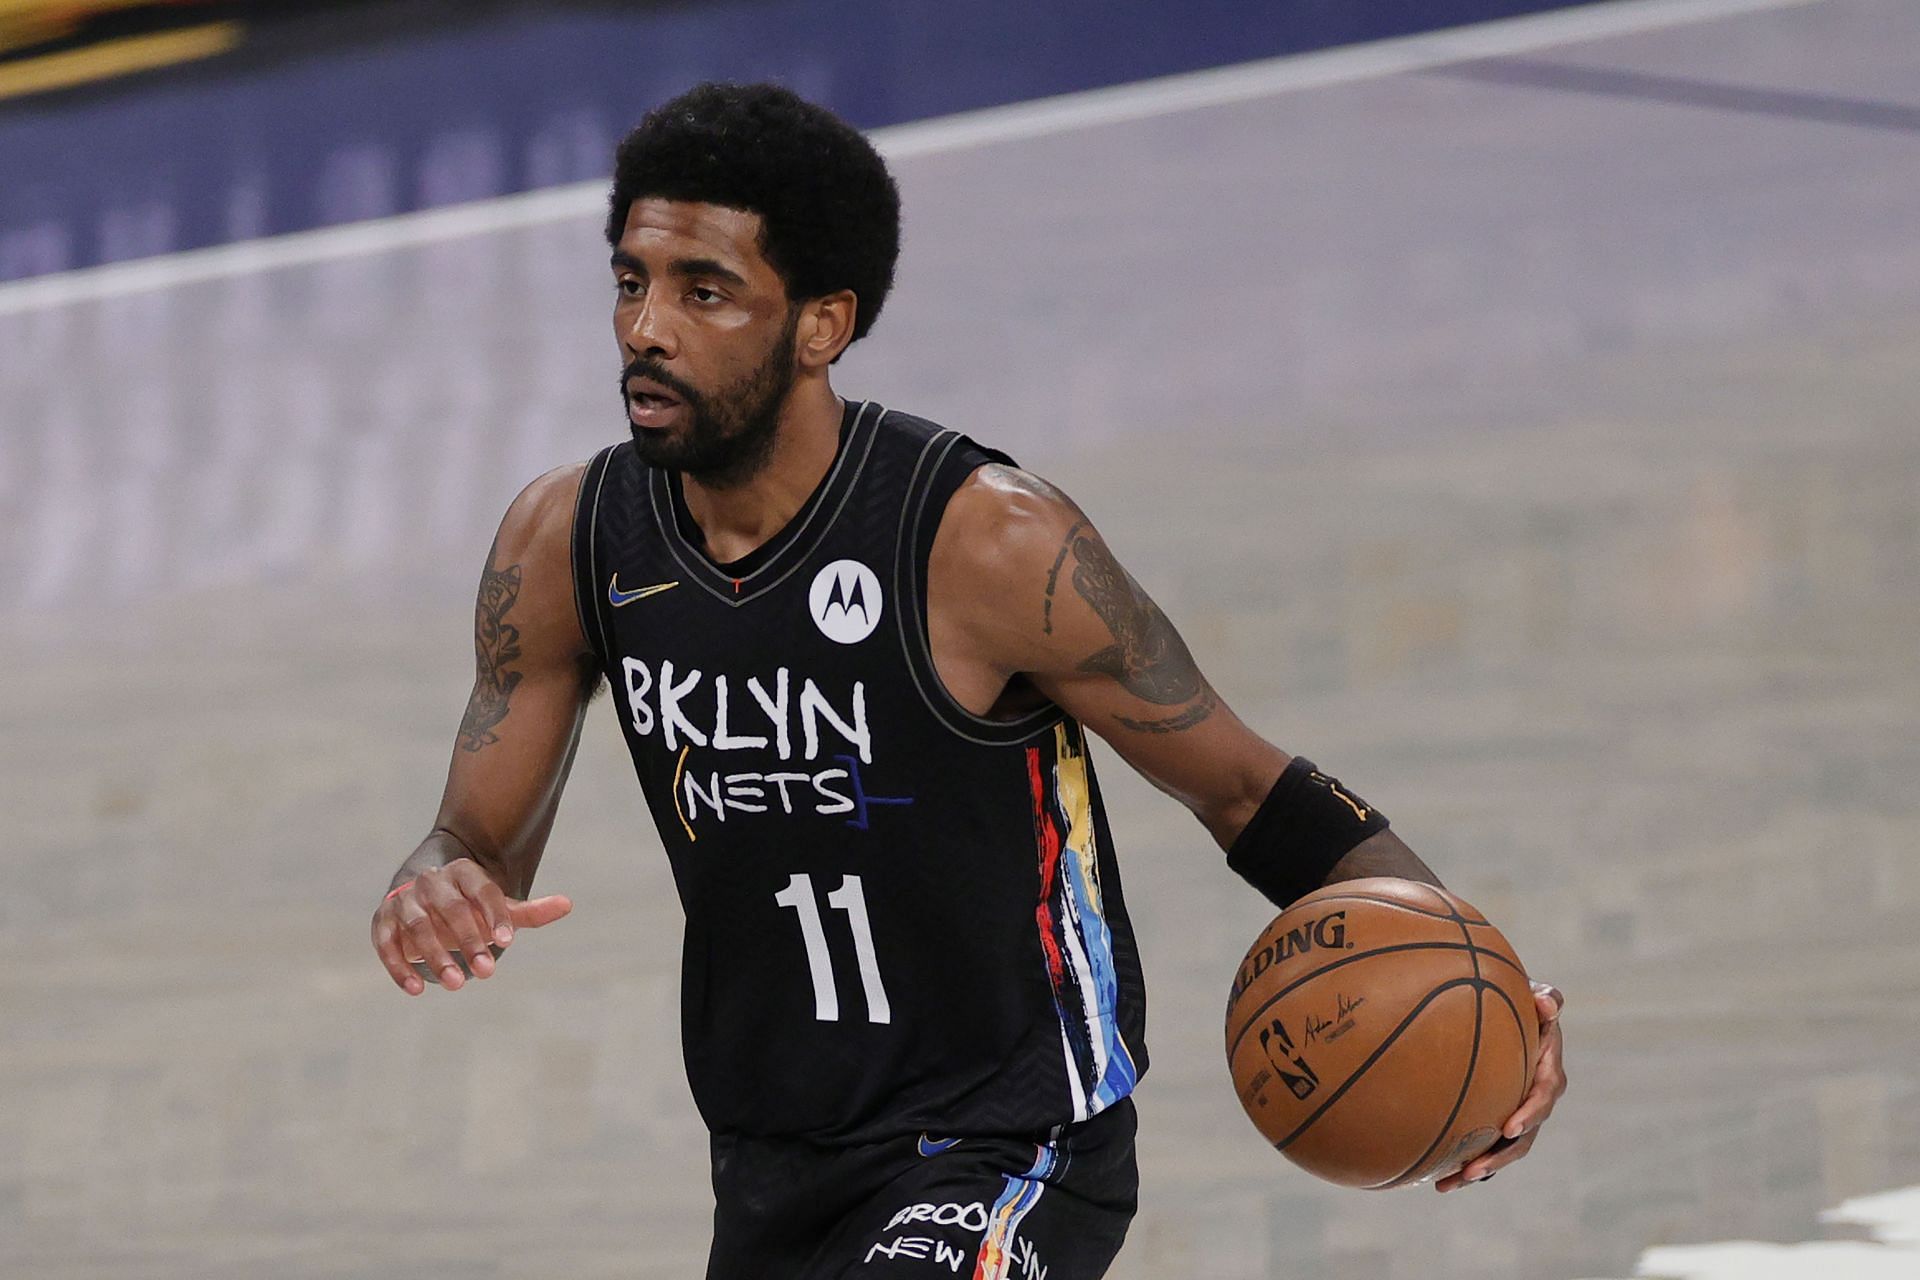 Kyrie Irving will remain sidelined for the Brooklyn Nets.